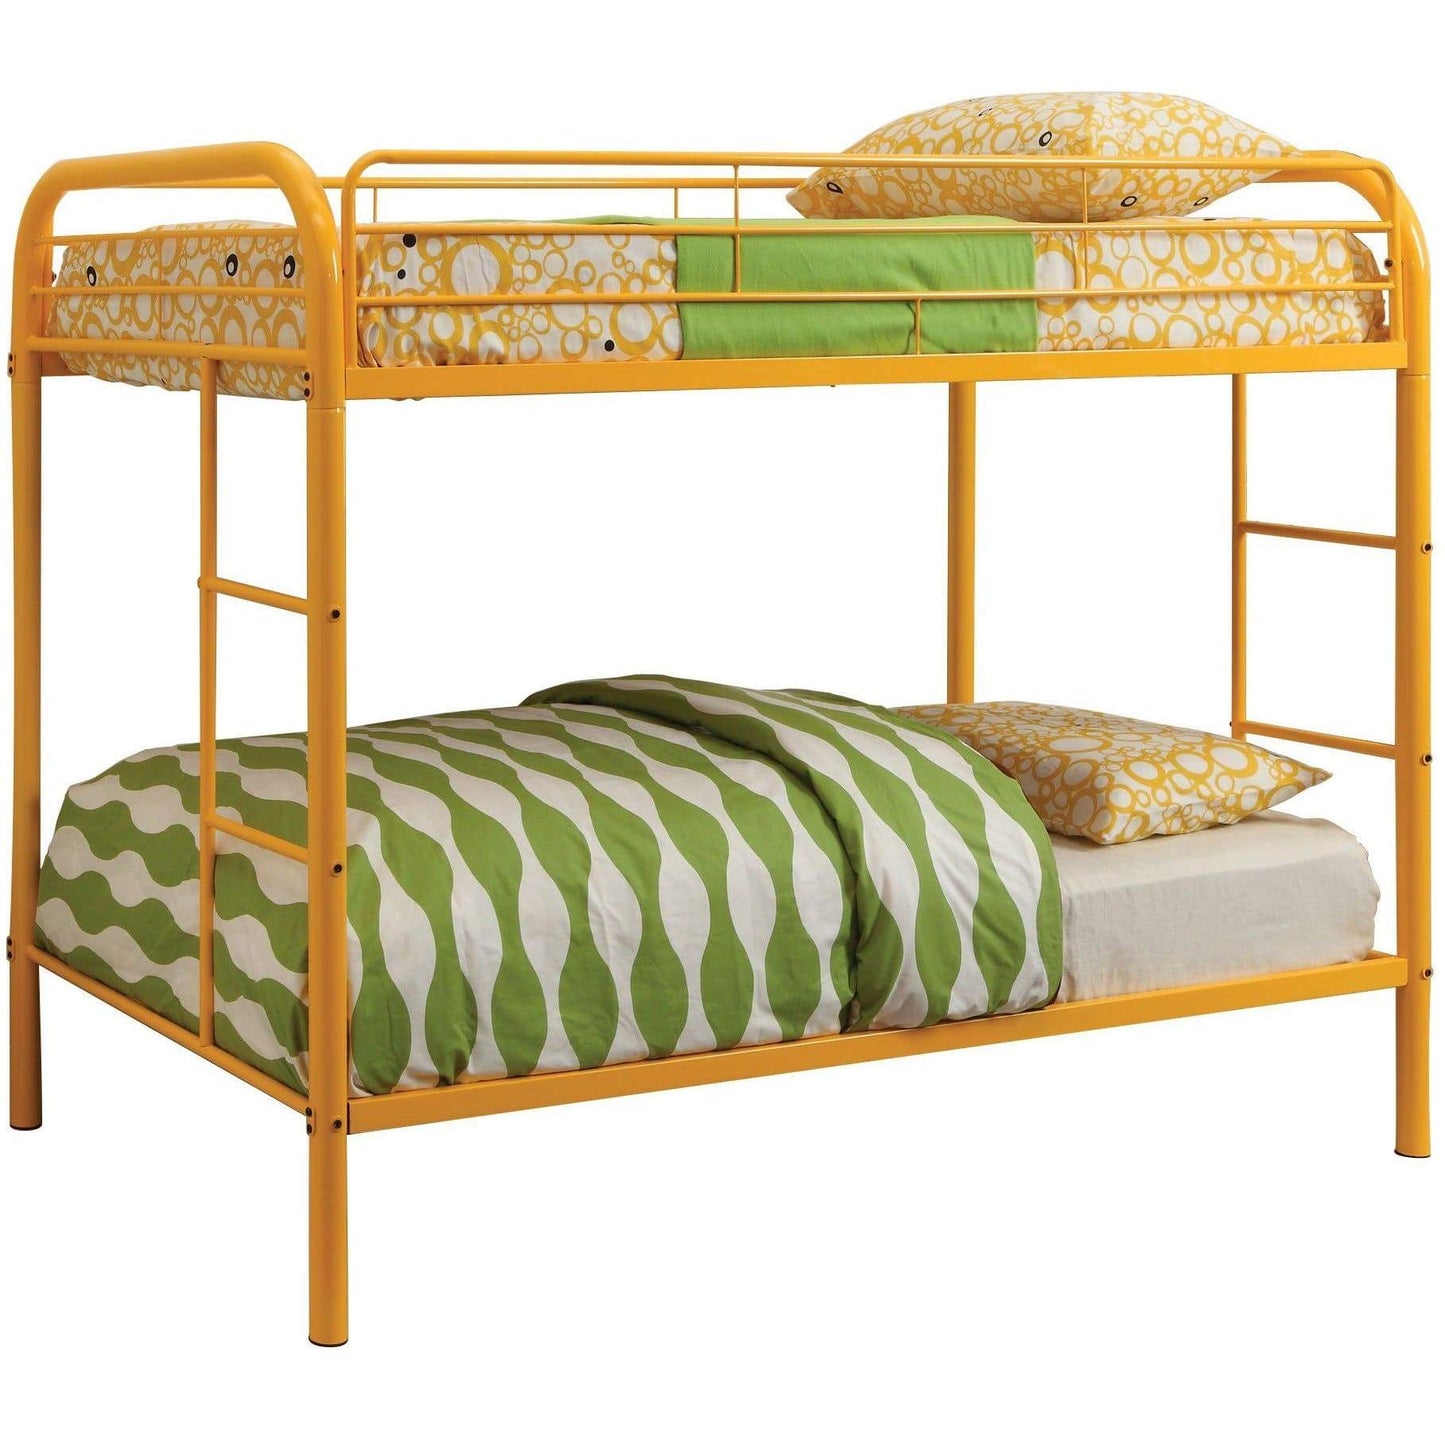 Furniture of America bunk bed Clementine Contemporary Twin Over Twin Bunk Bed Clementine Contemporary Twin Over Twin Bunk Bed